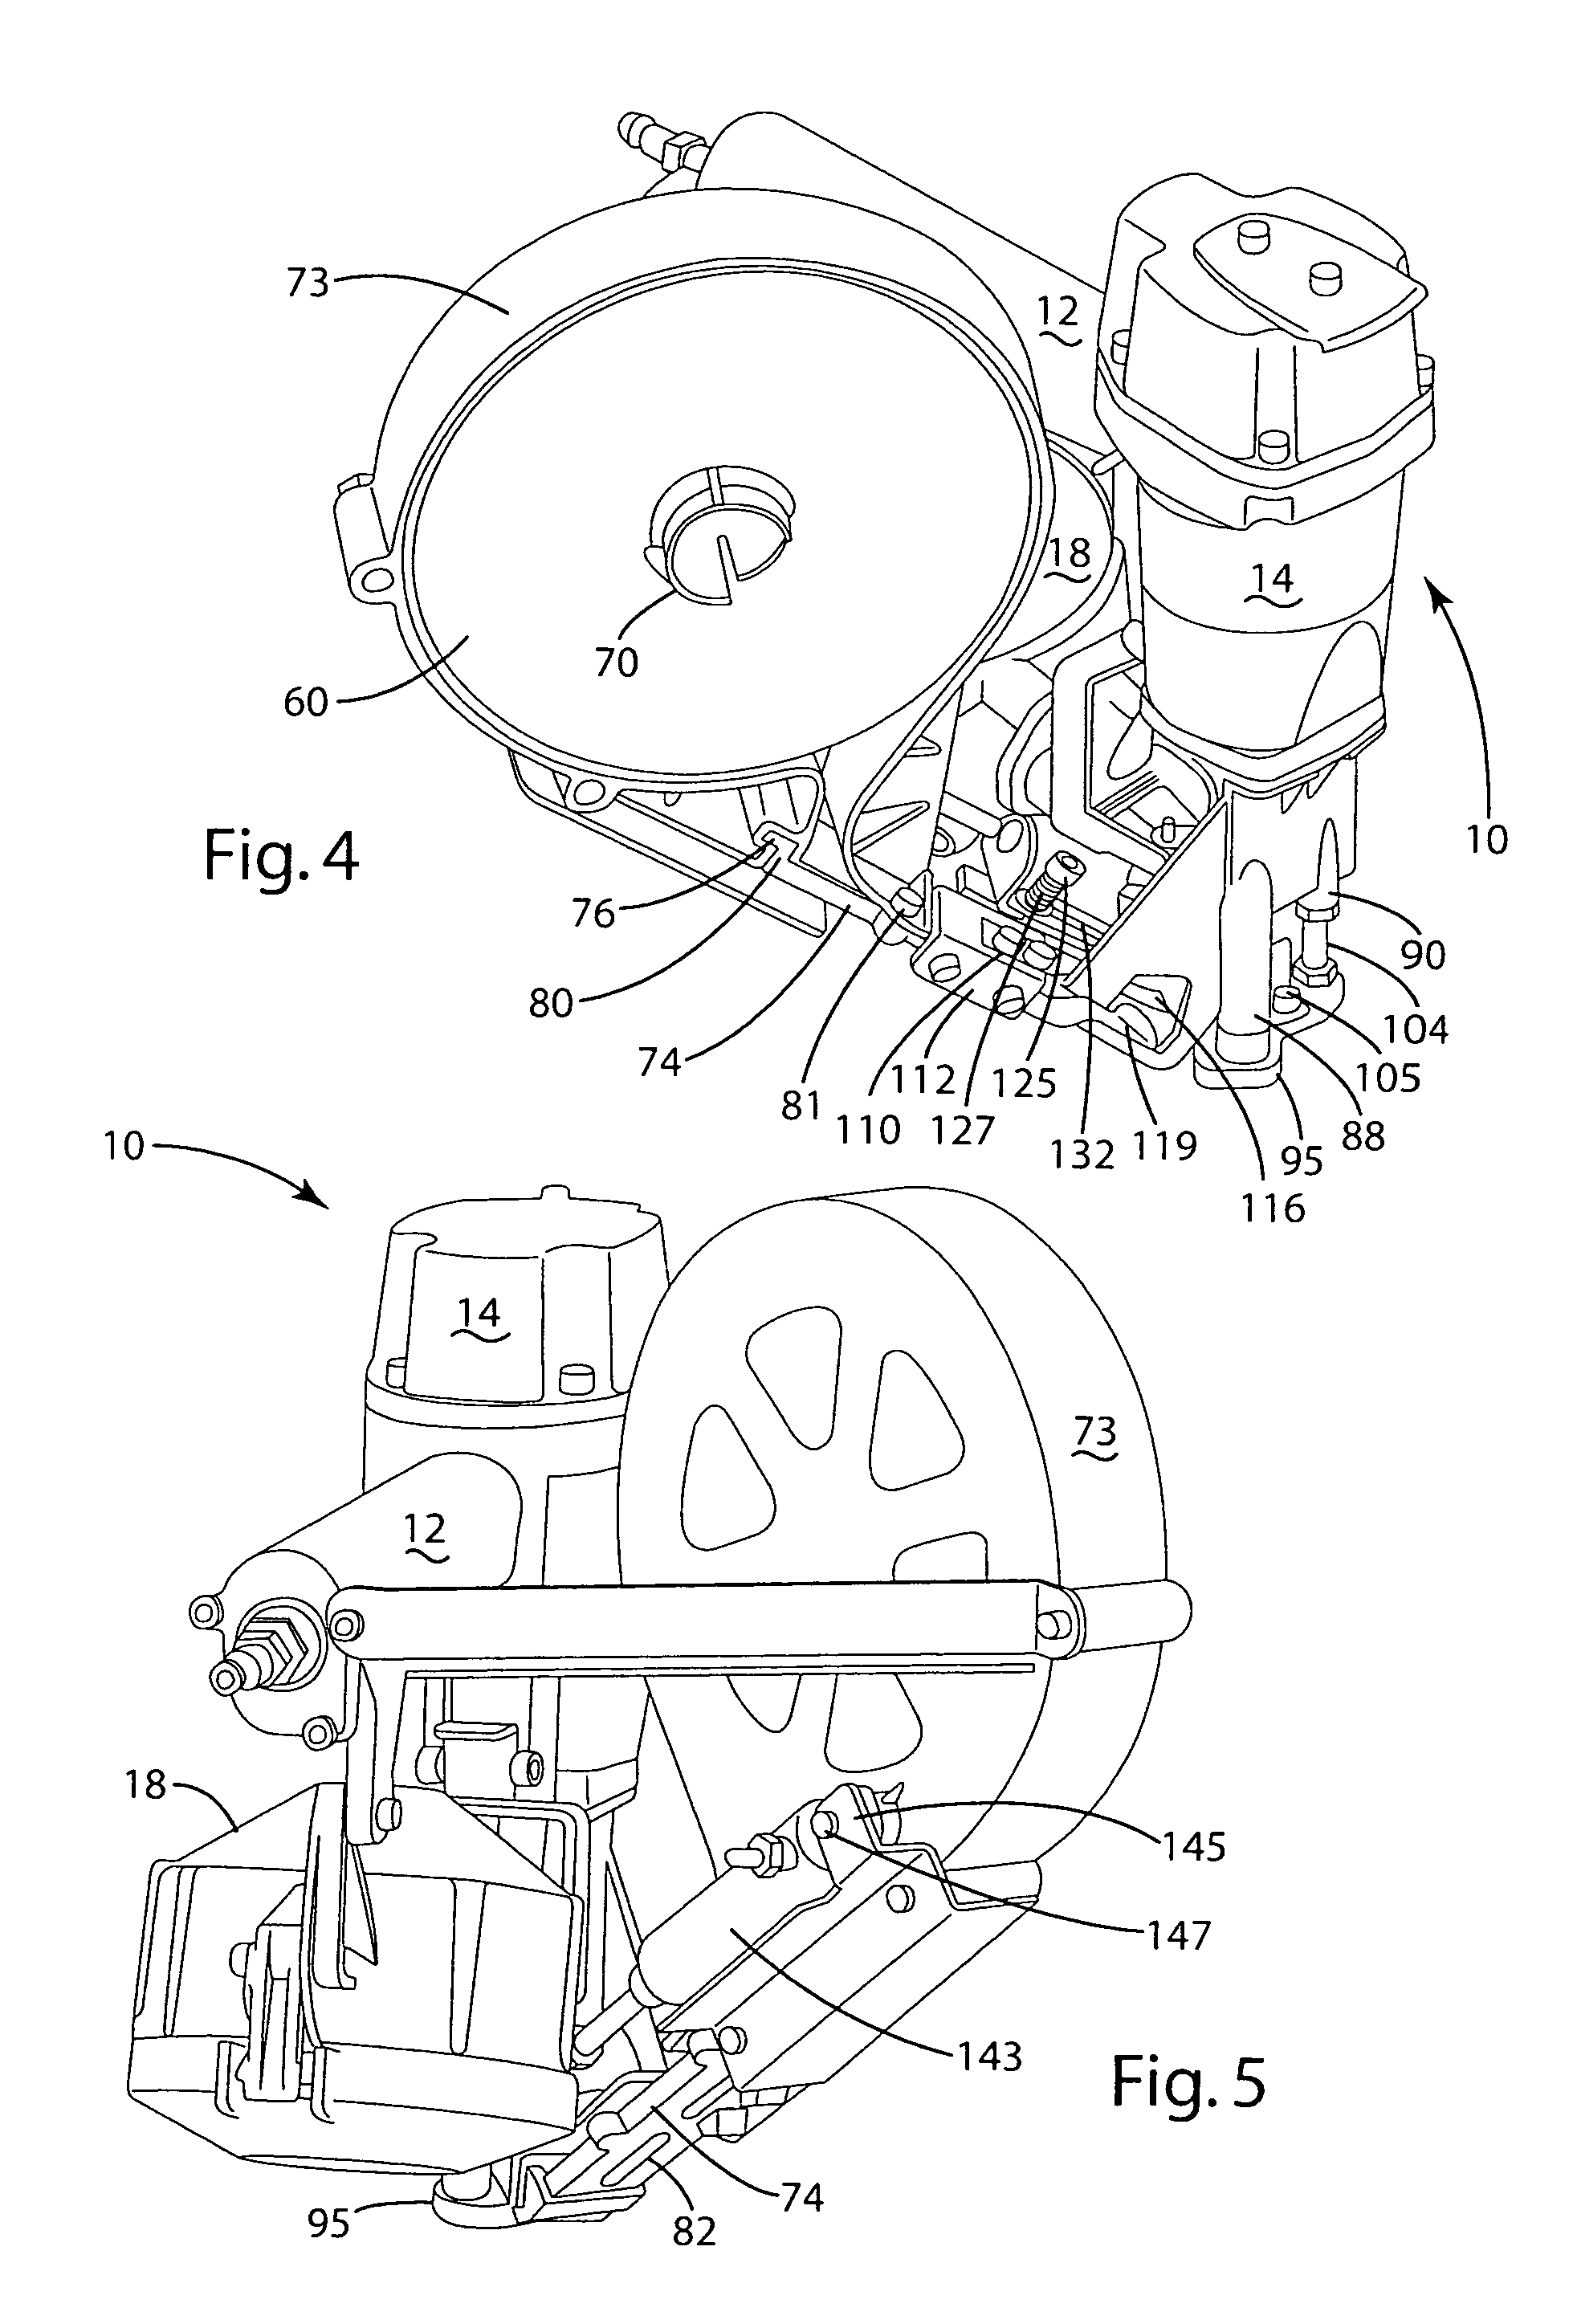 Cap assembly and cap for automatic fastener driver